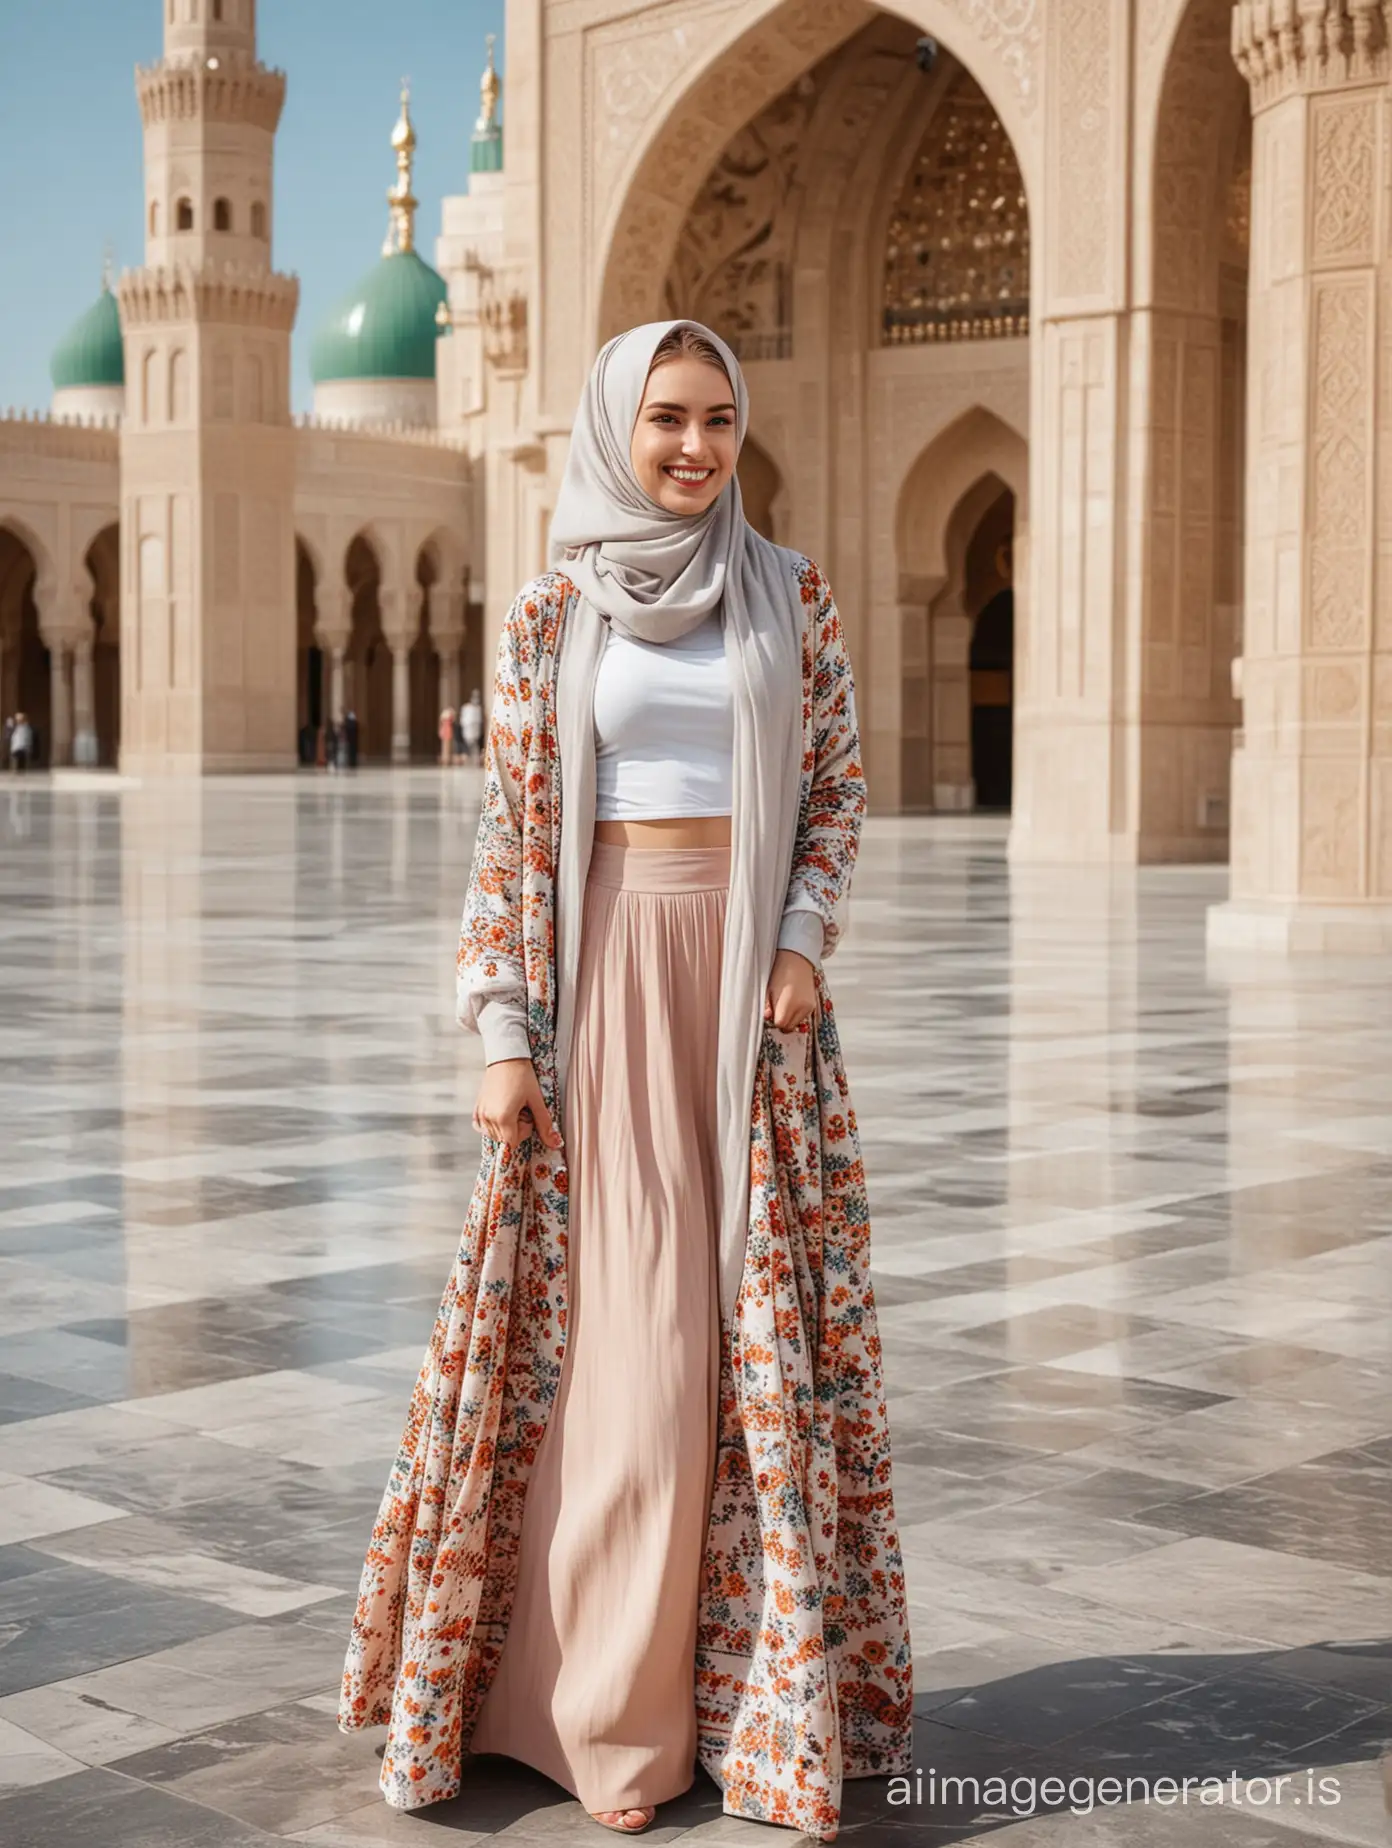 russian girl in hijab, wearing outer cardigan, long maxi skirt, eye level, dynamic pose, smile, background Mecca mosque